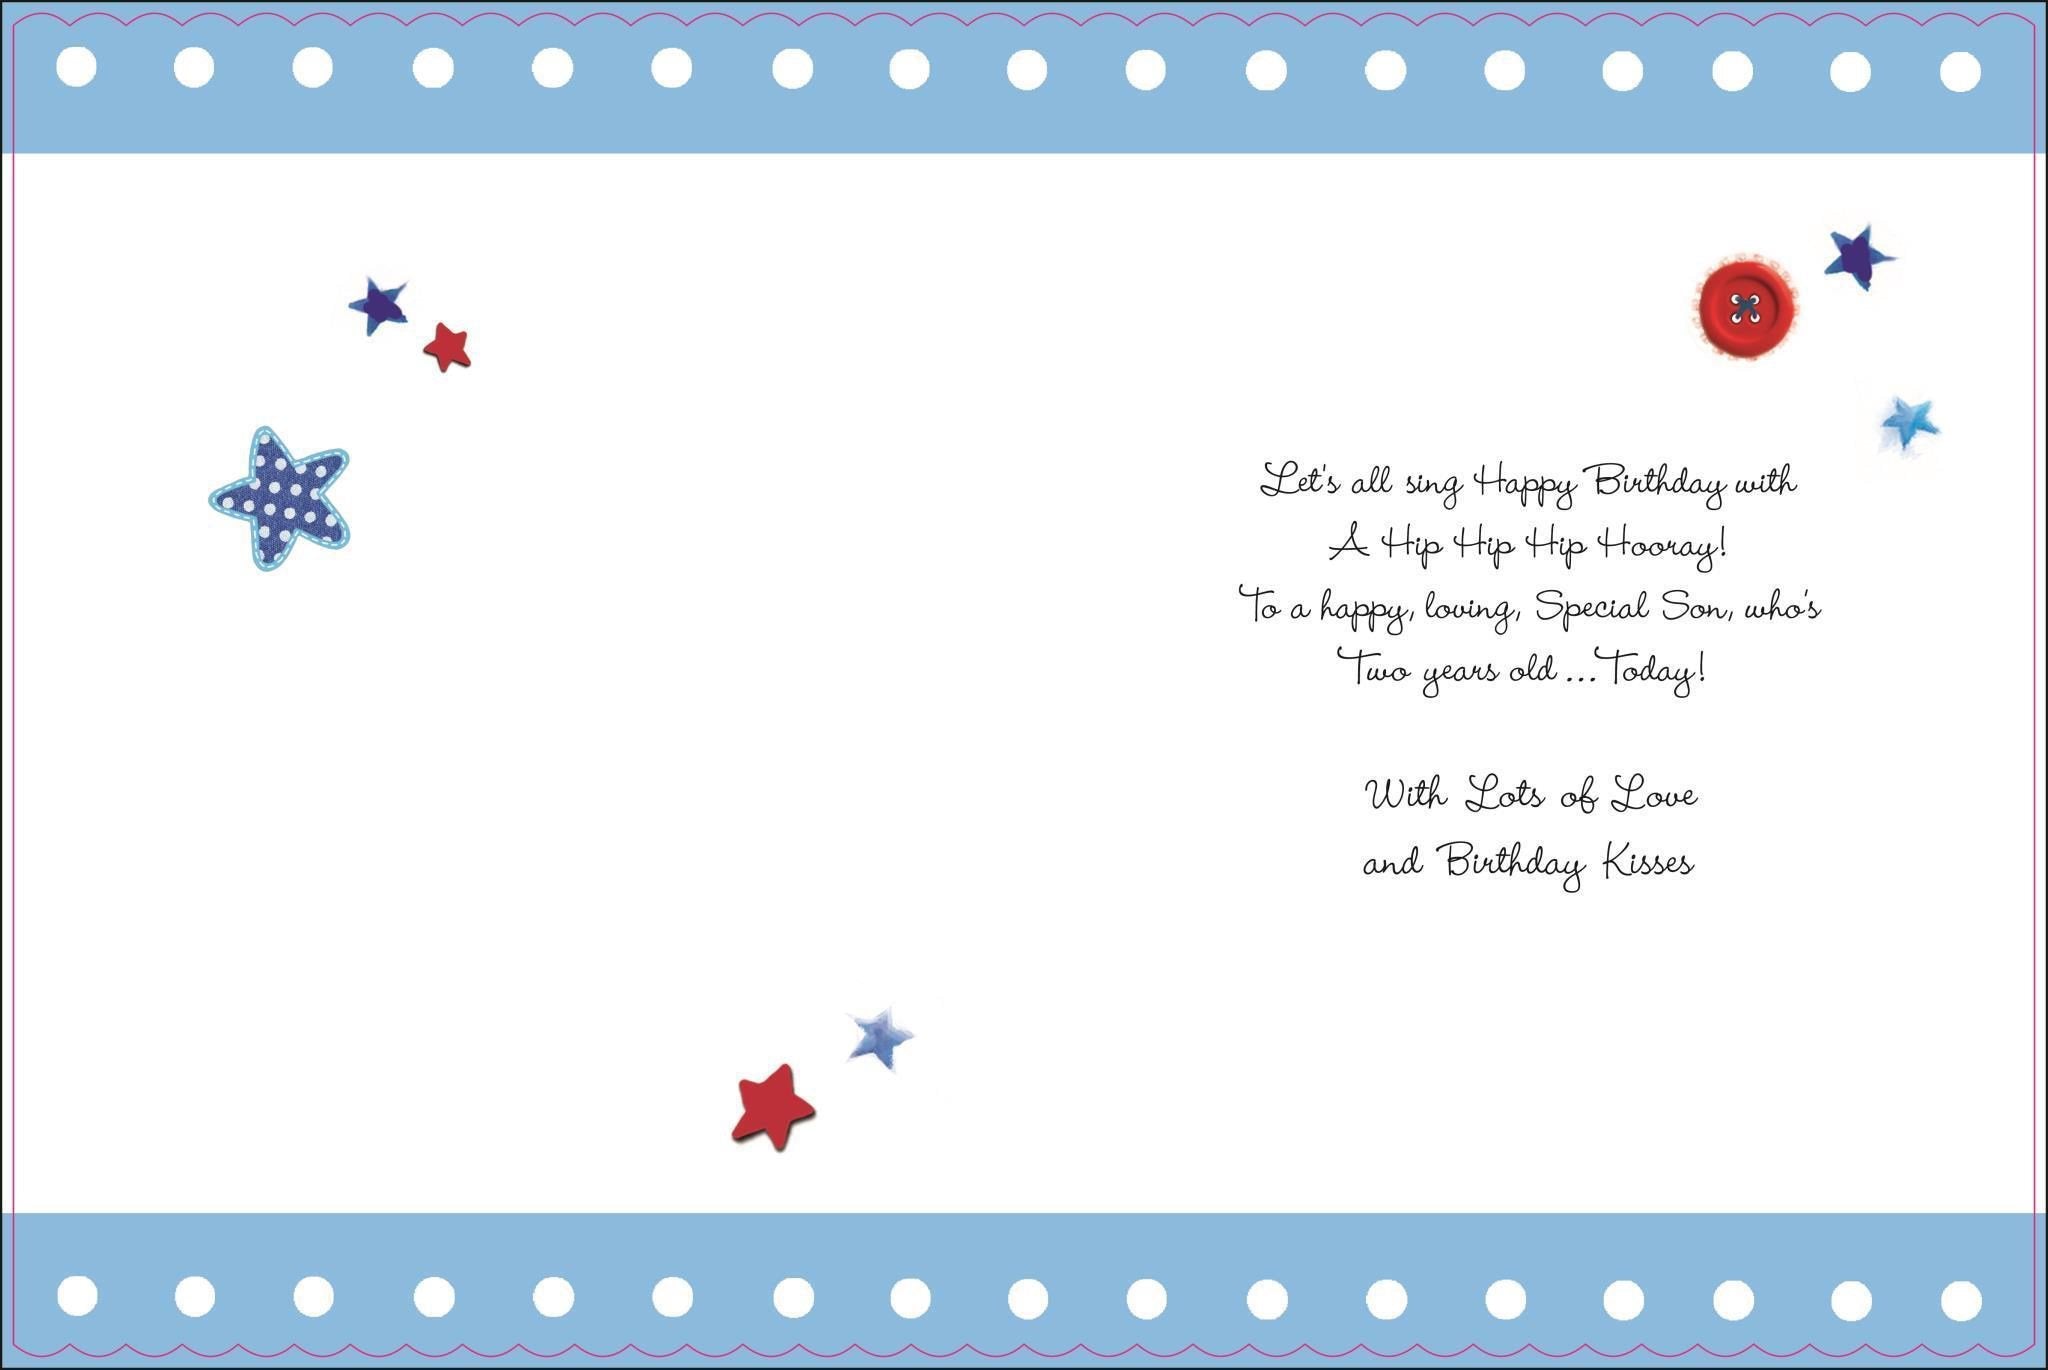 Inside of Son 2nd Birthday Greetings Card